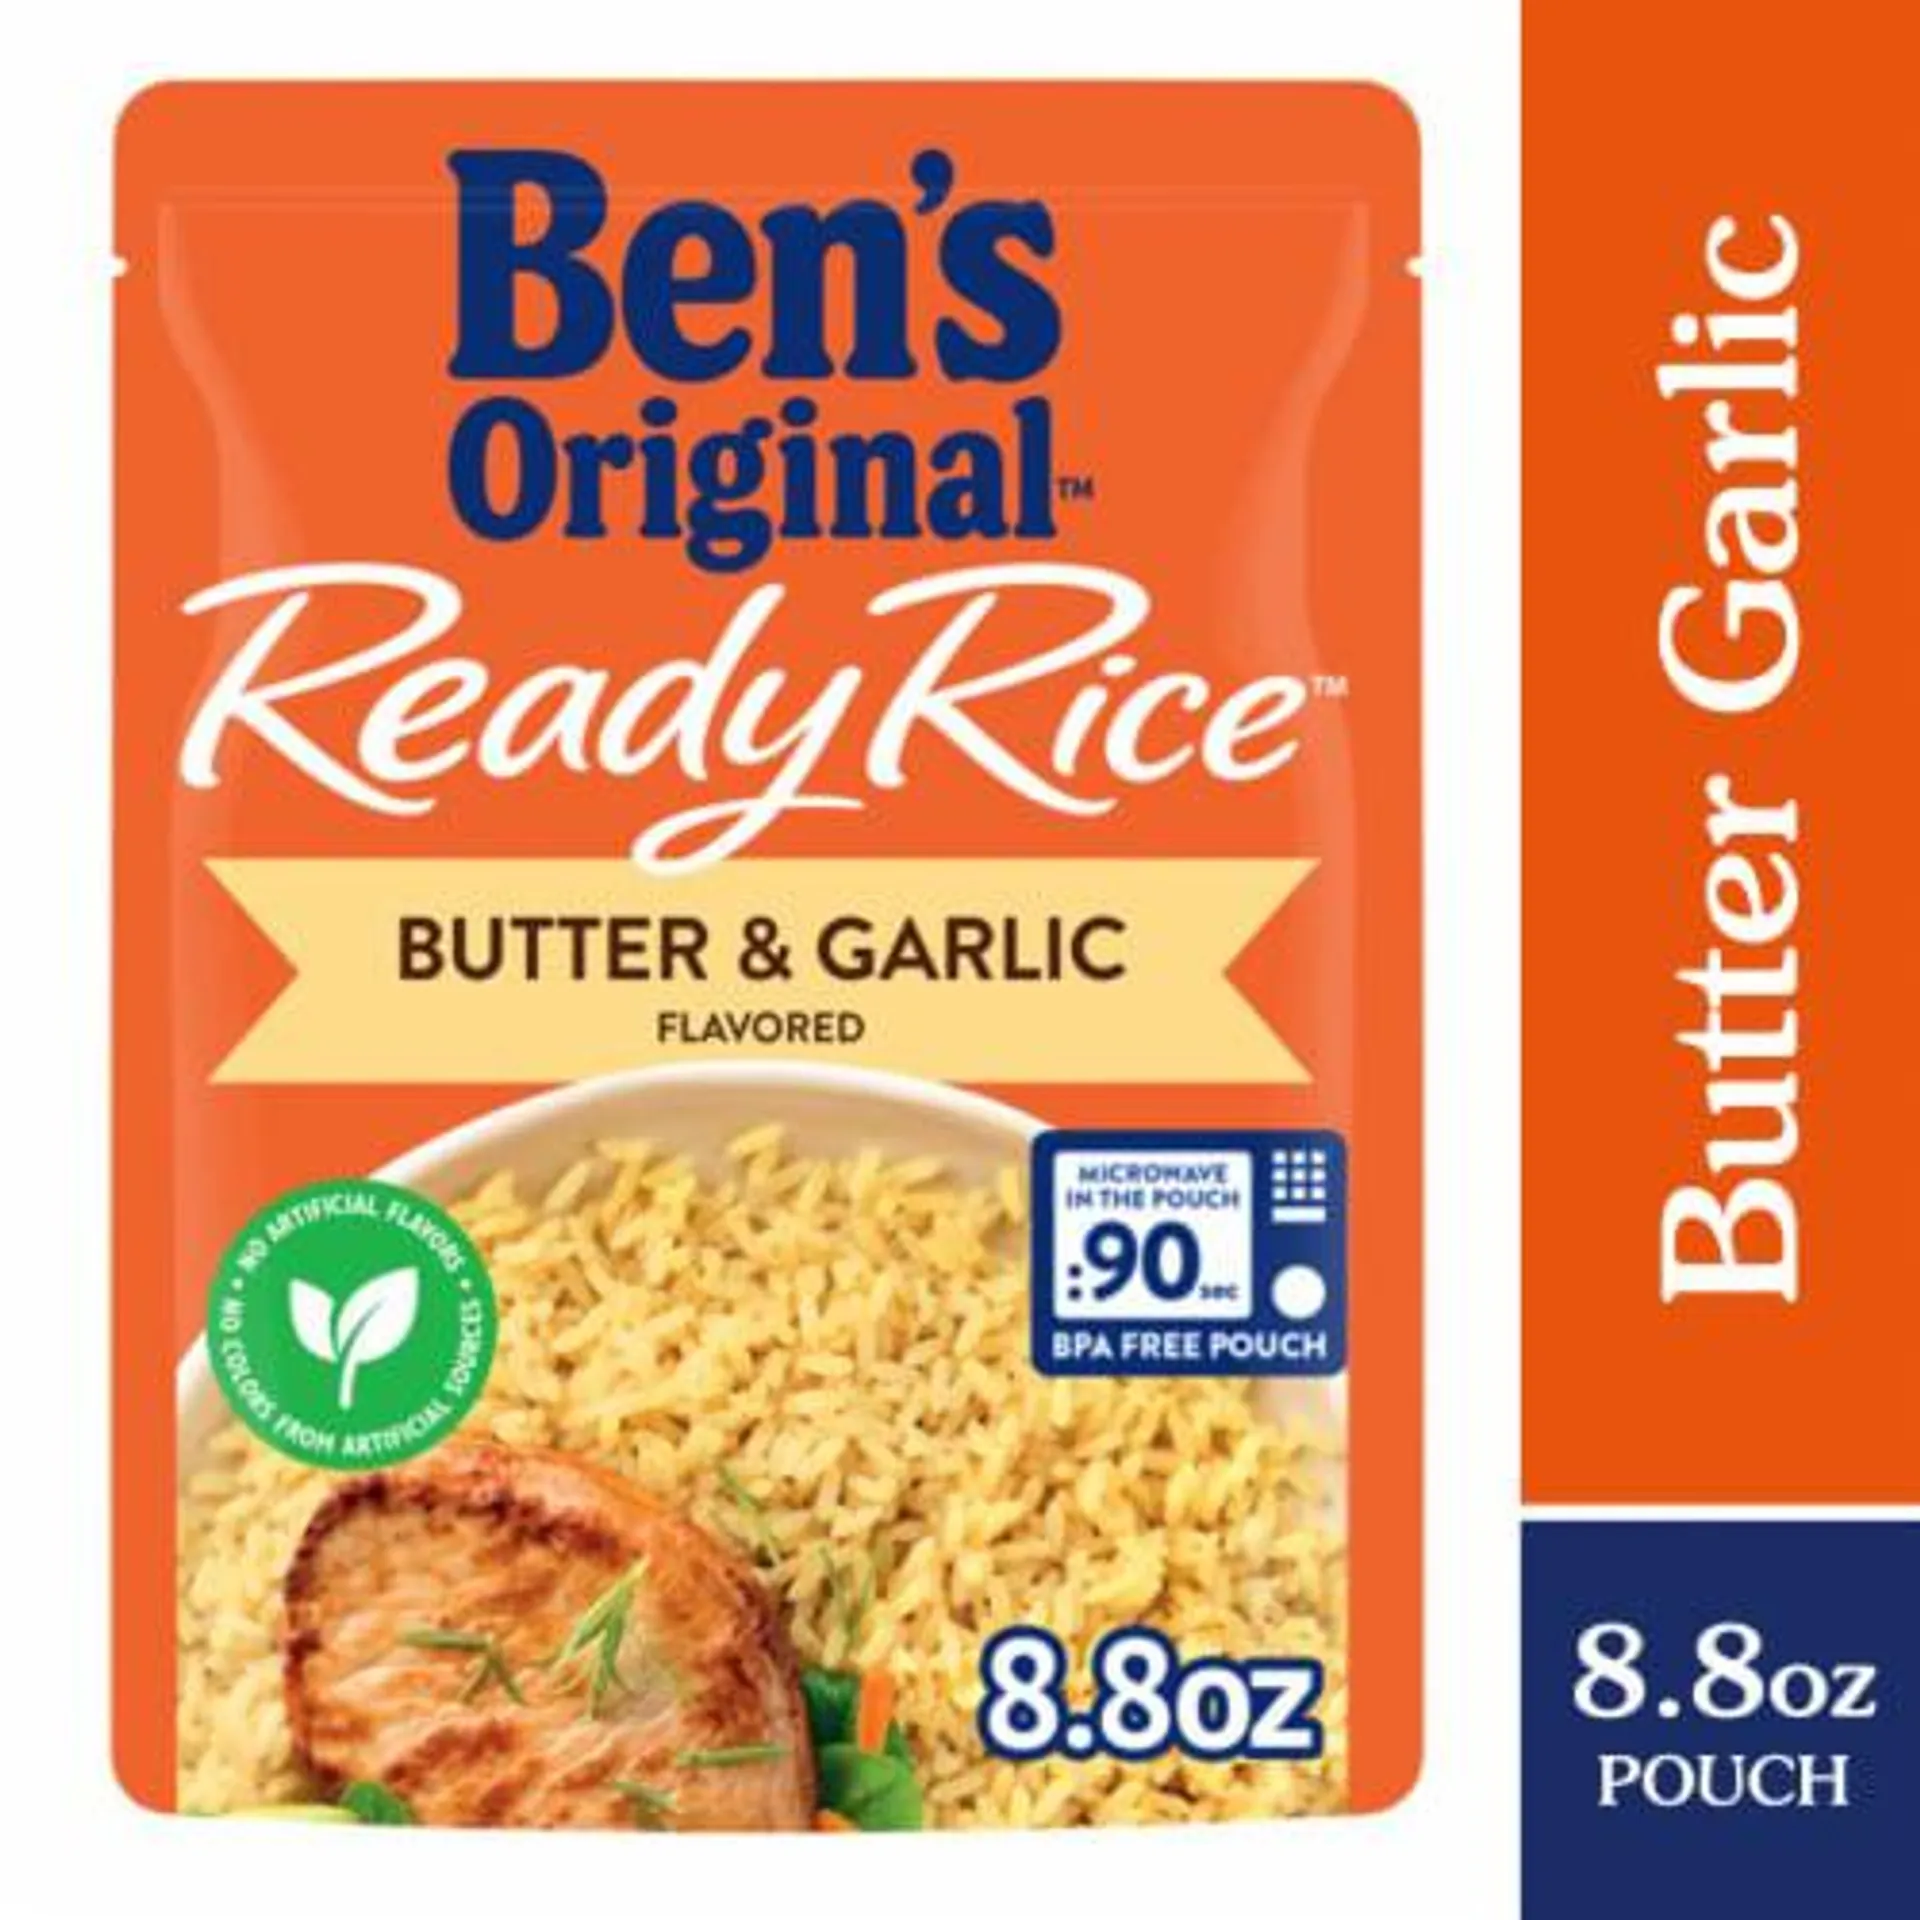 Ben's Original™ Ready Rice Butter and Garlic Flavored Rice